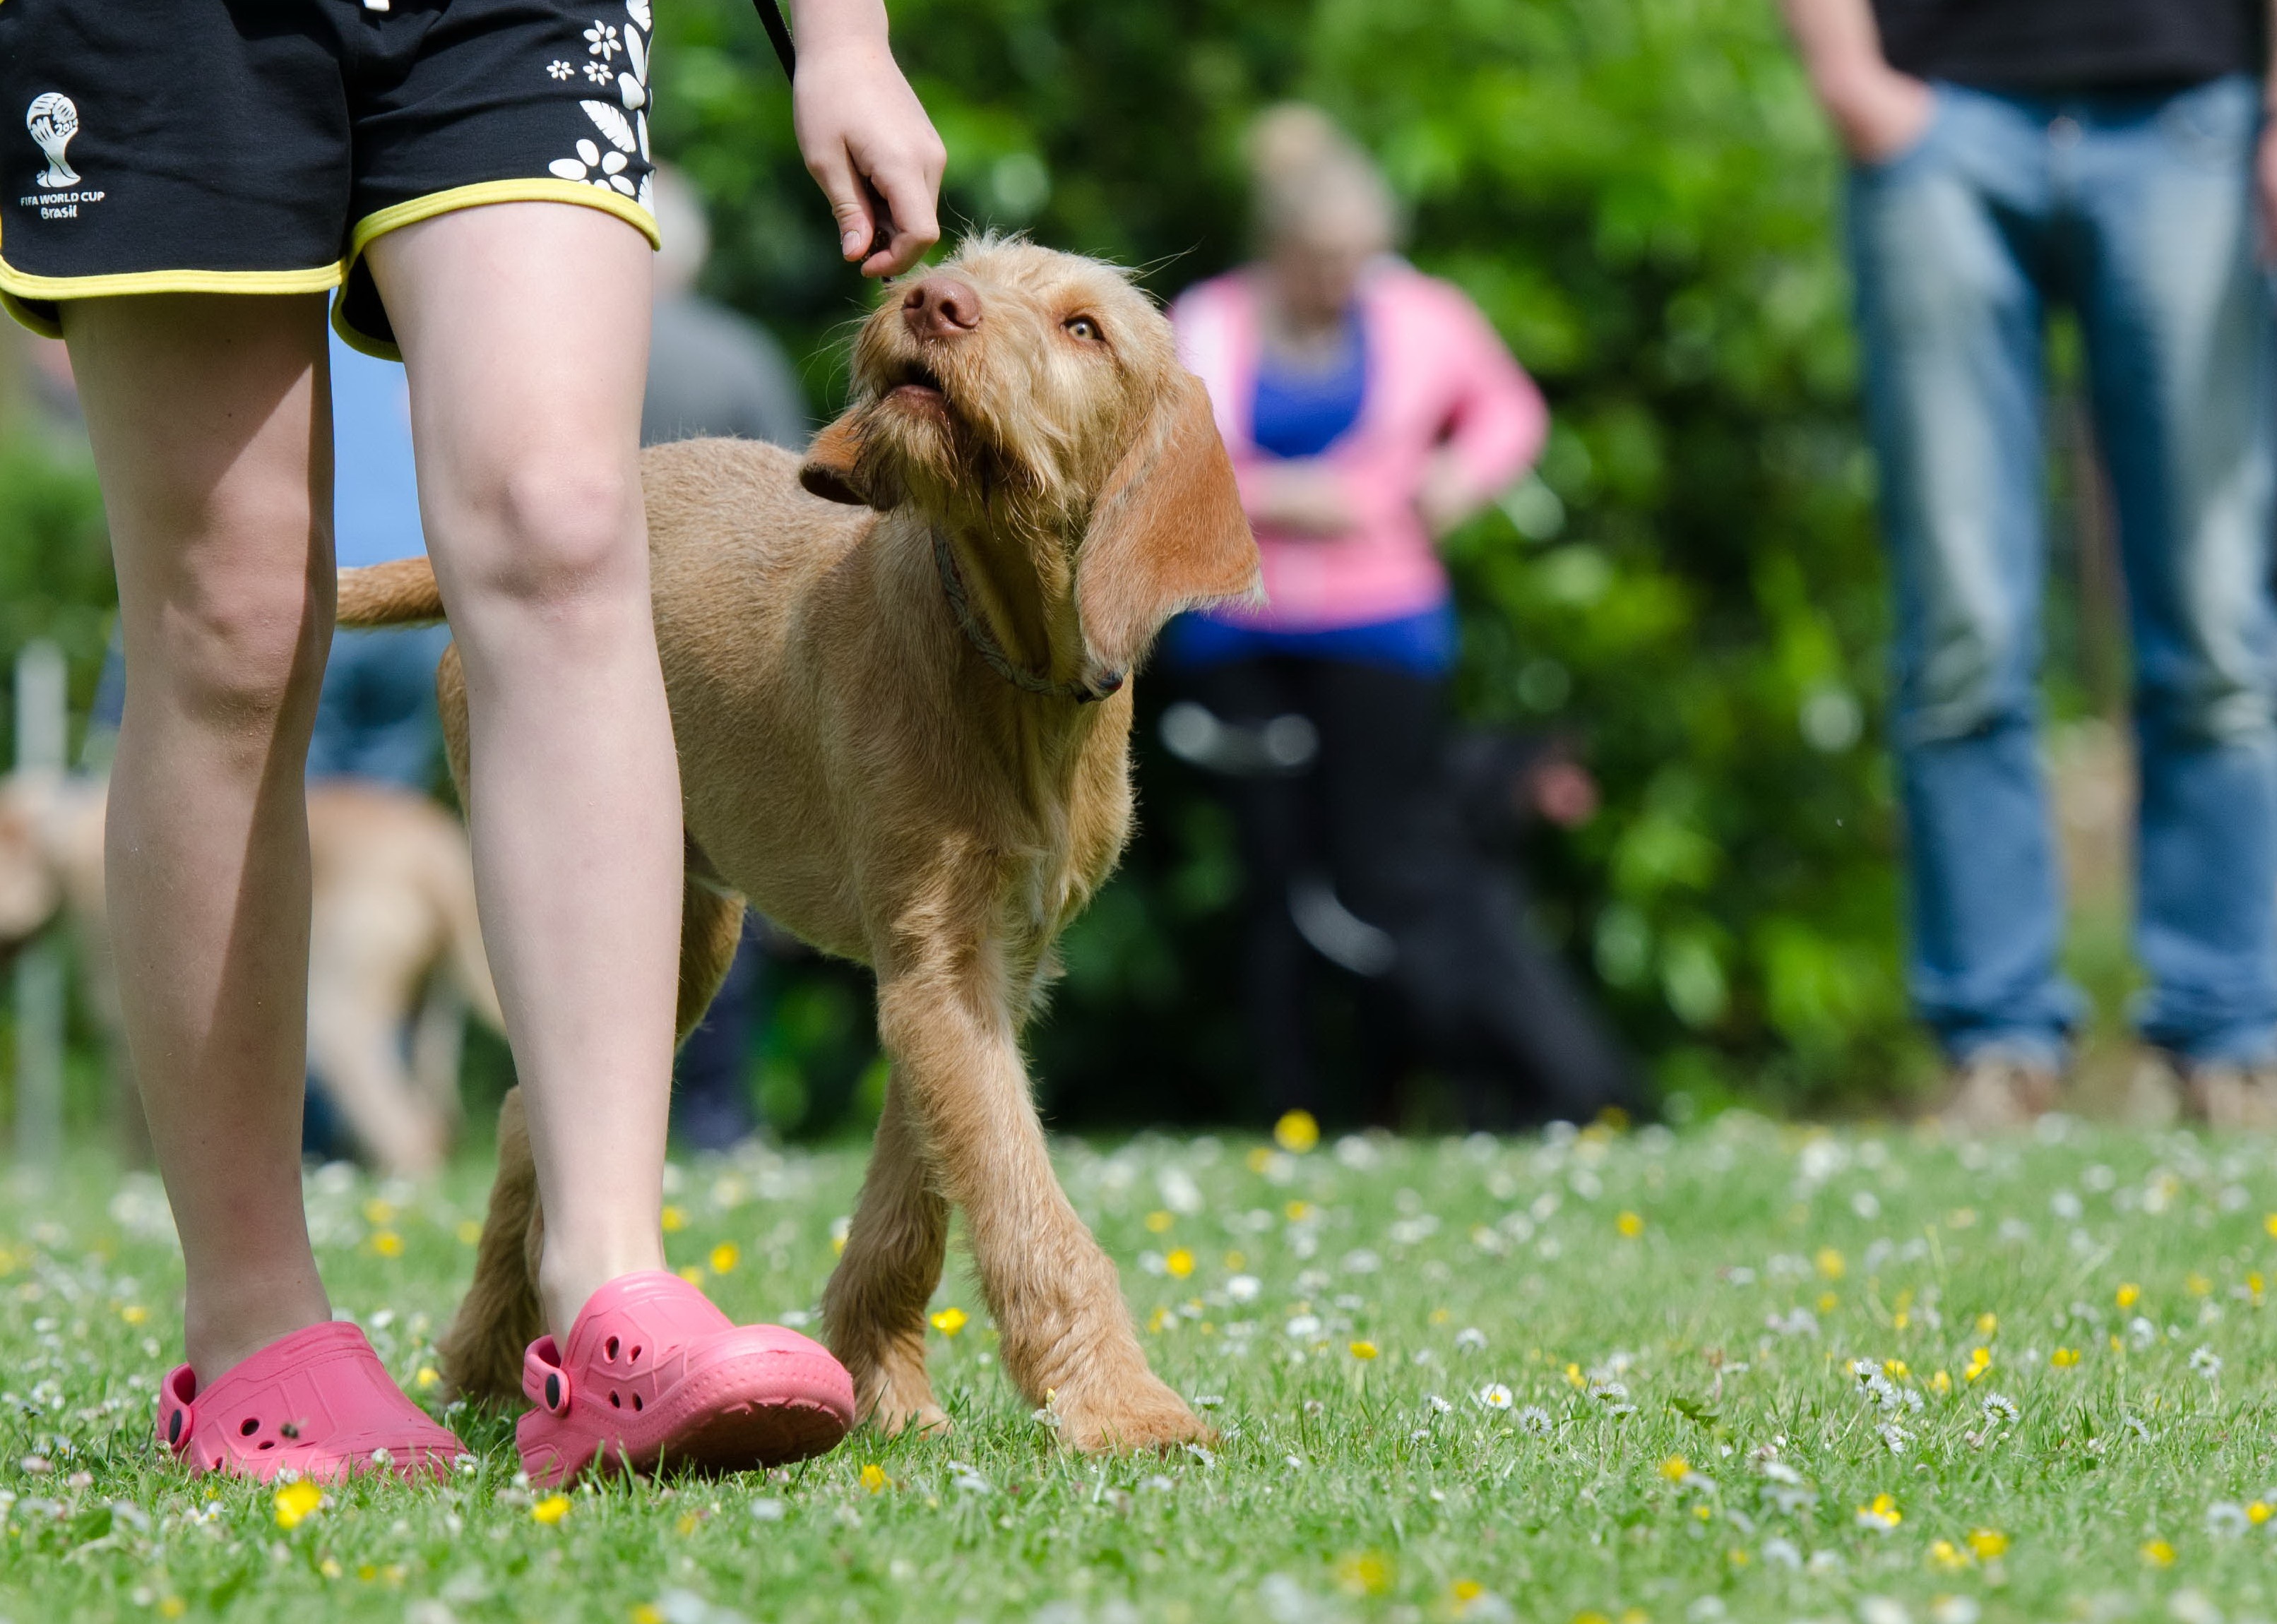 Free Images : grass, lawn, puppy, sports, dog training, dog walking ...